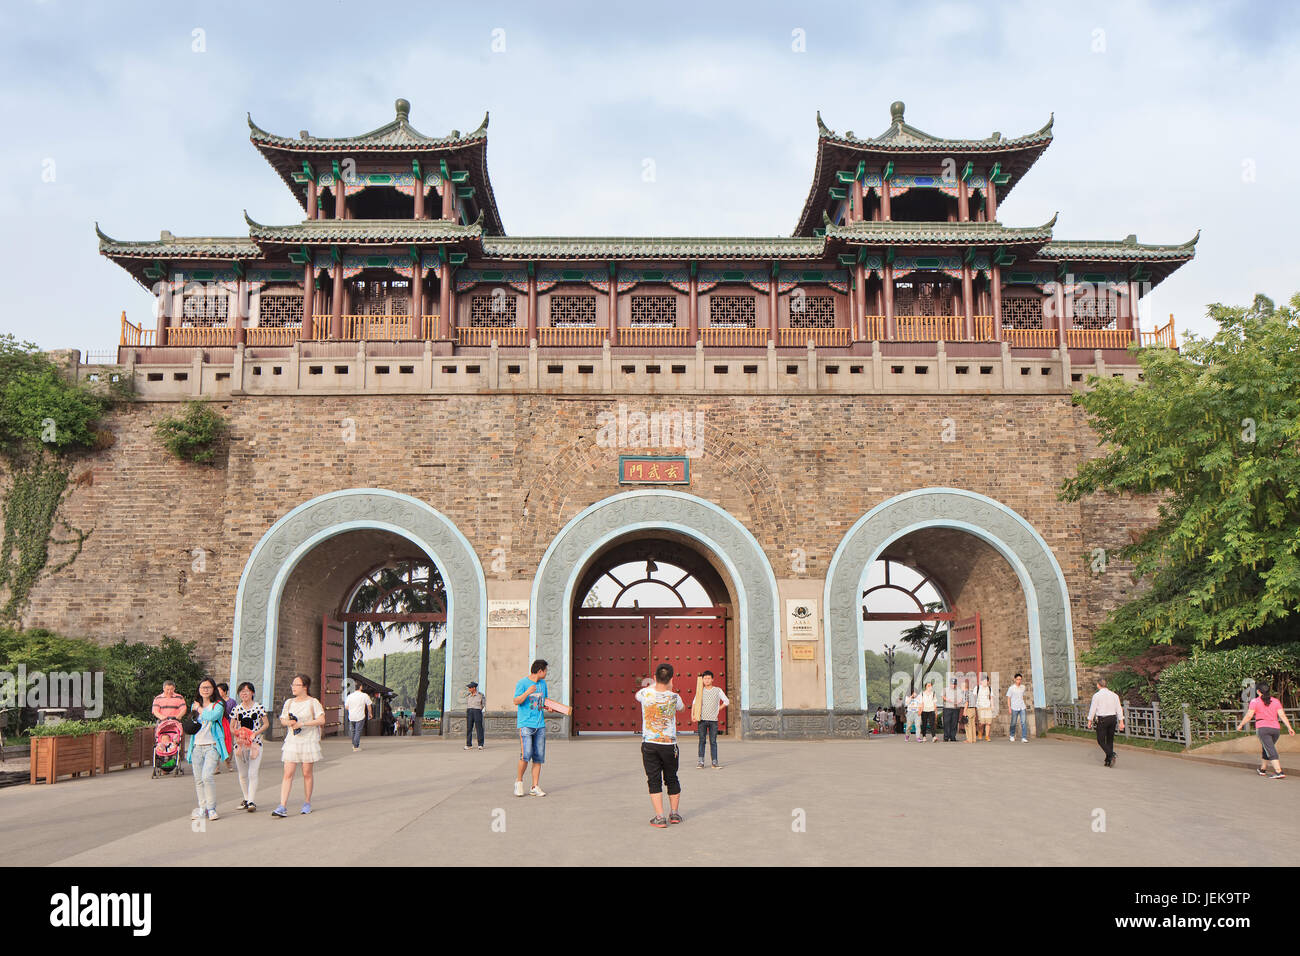 NANJING-MAY 26, 2014. Ancient gate to Zhongshan scenic area. Nanjing, capital of Jiangsu province, is a city with a very rich history. Stock Photo